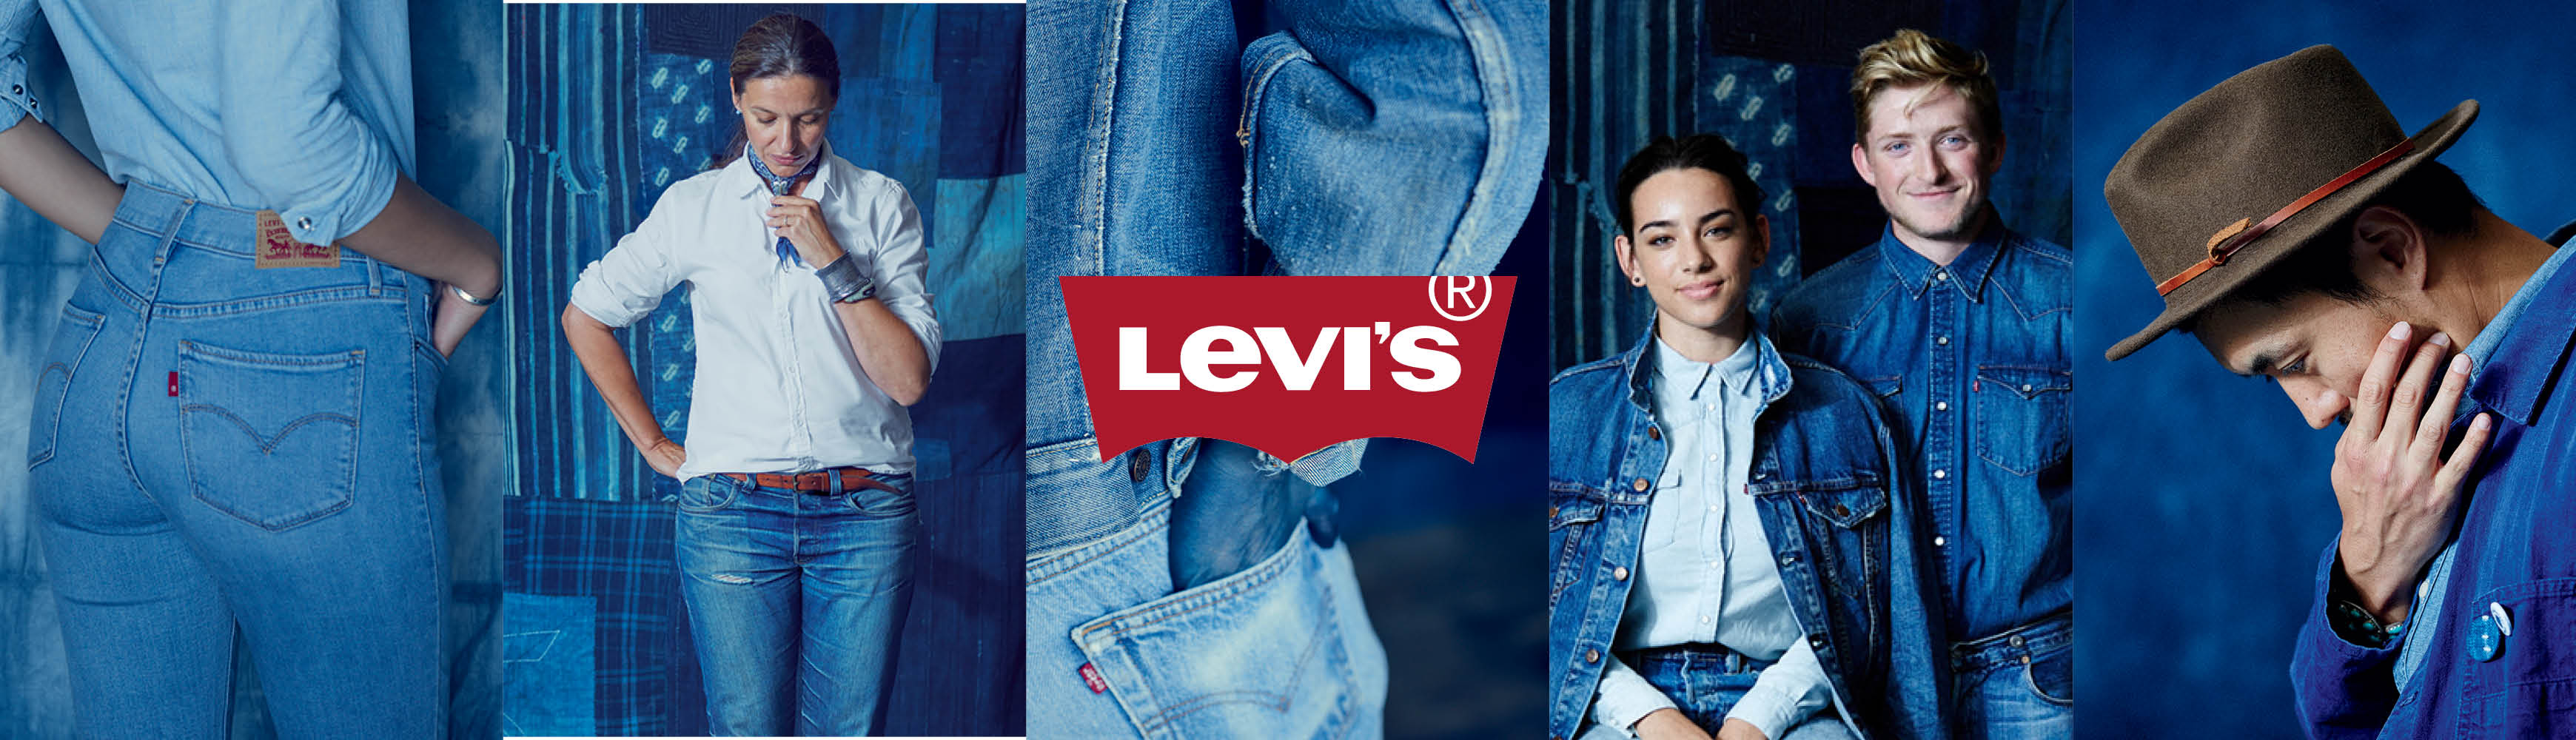 Levi's Outlet - Shopping | Citygate Outlets